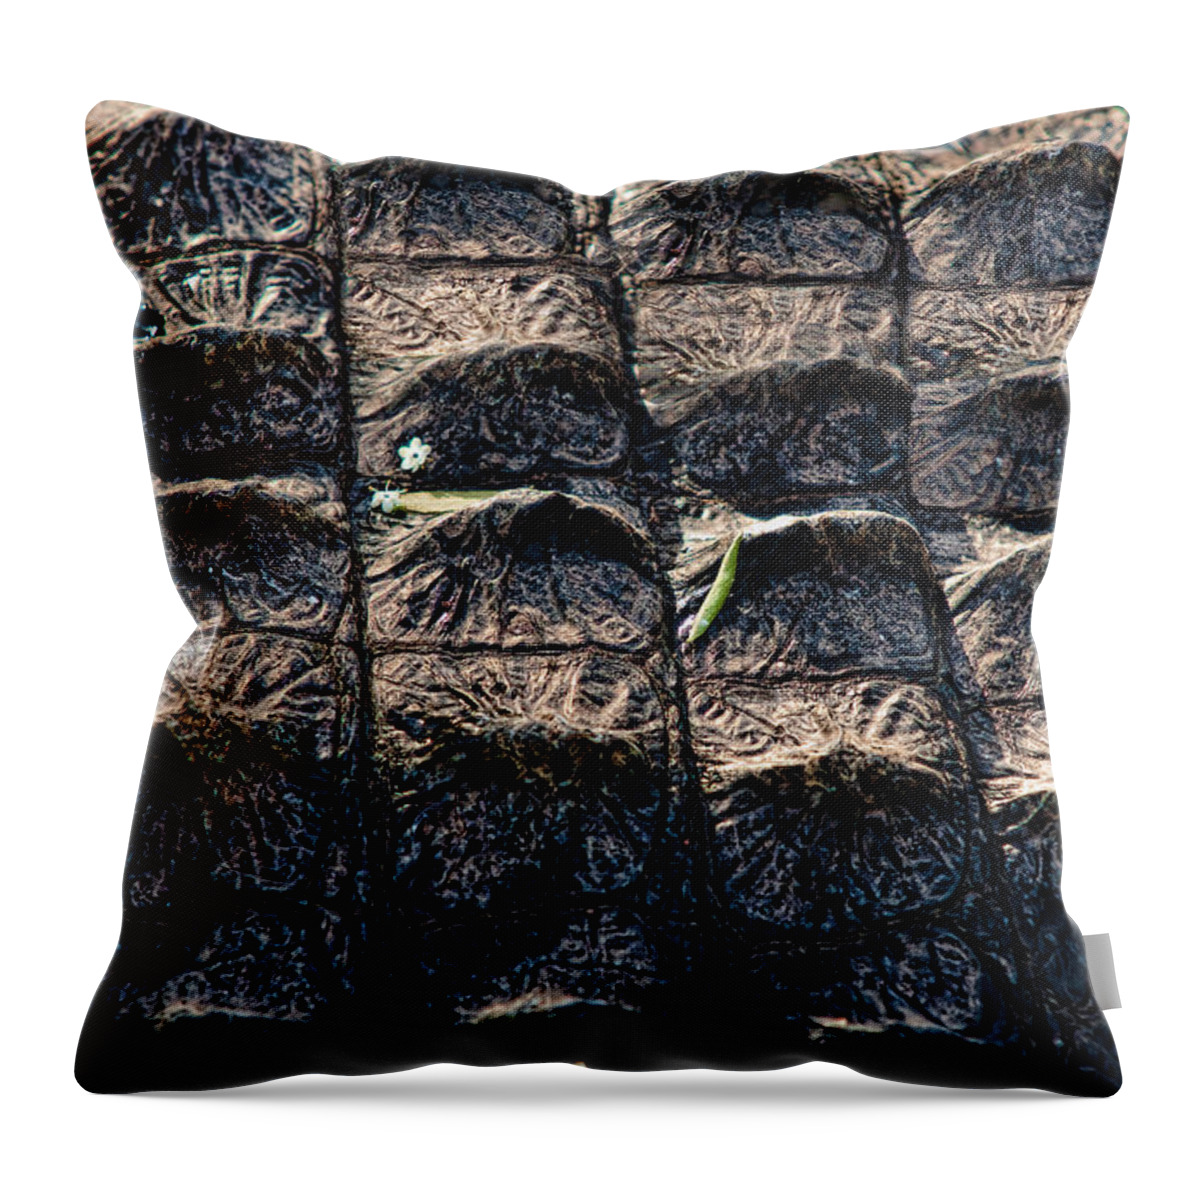 Alligator Throw Pillow featuring the photograph Gator Armor by Christopher Holmes